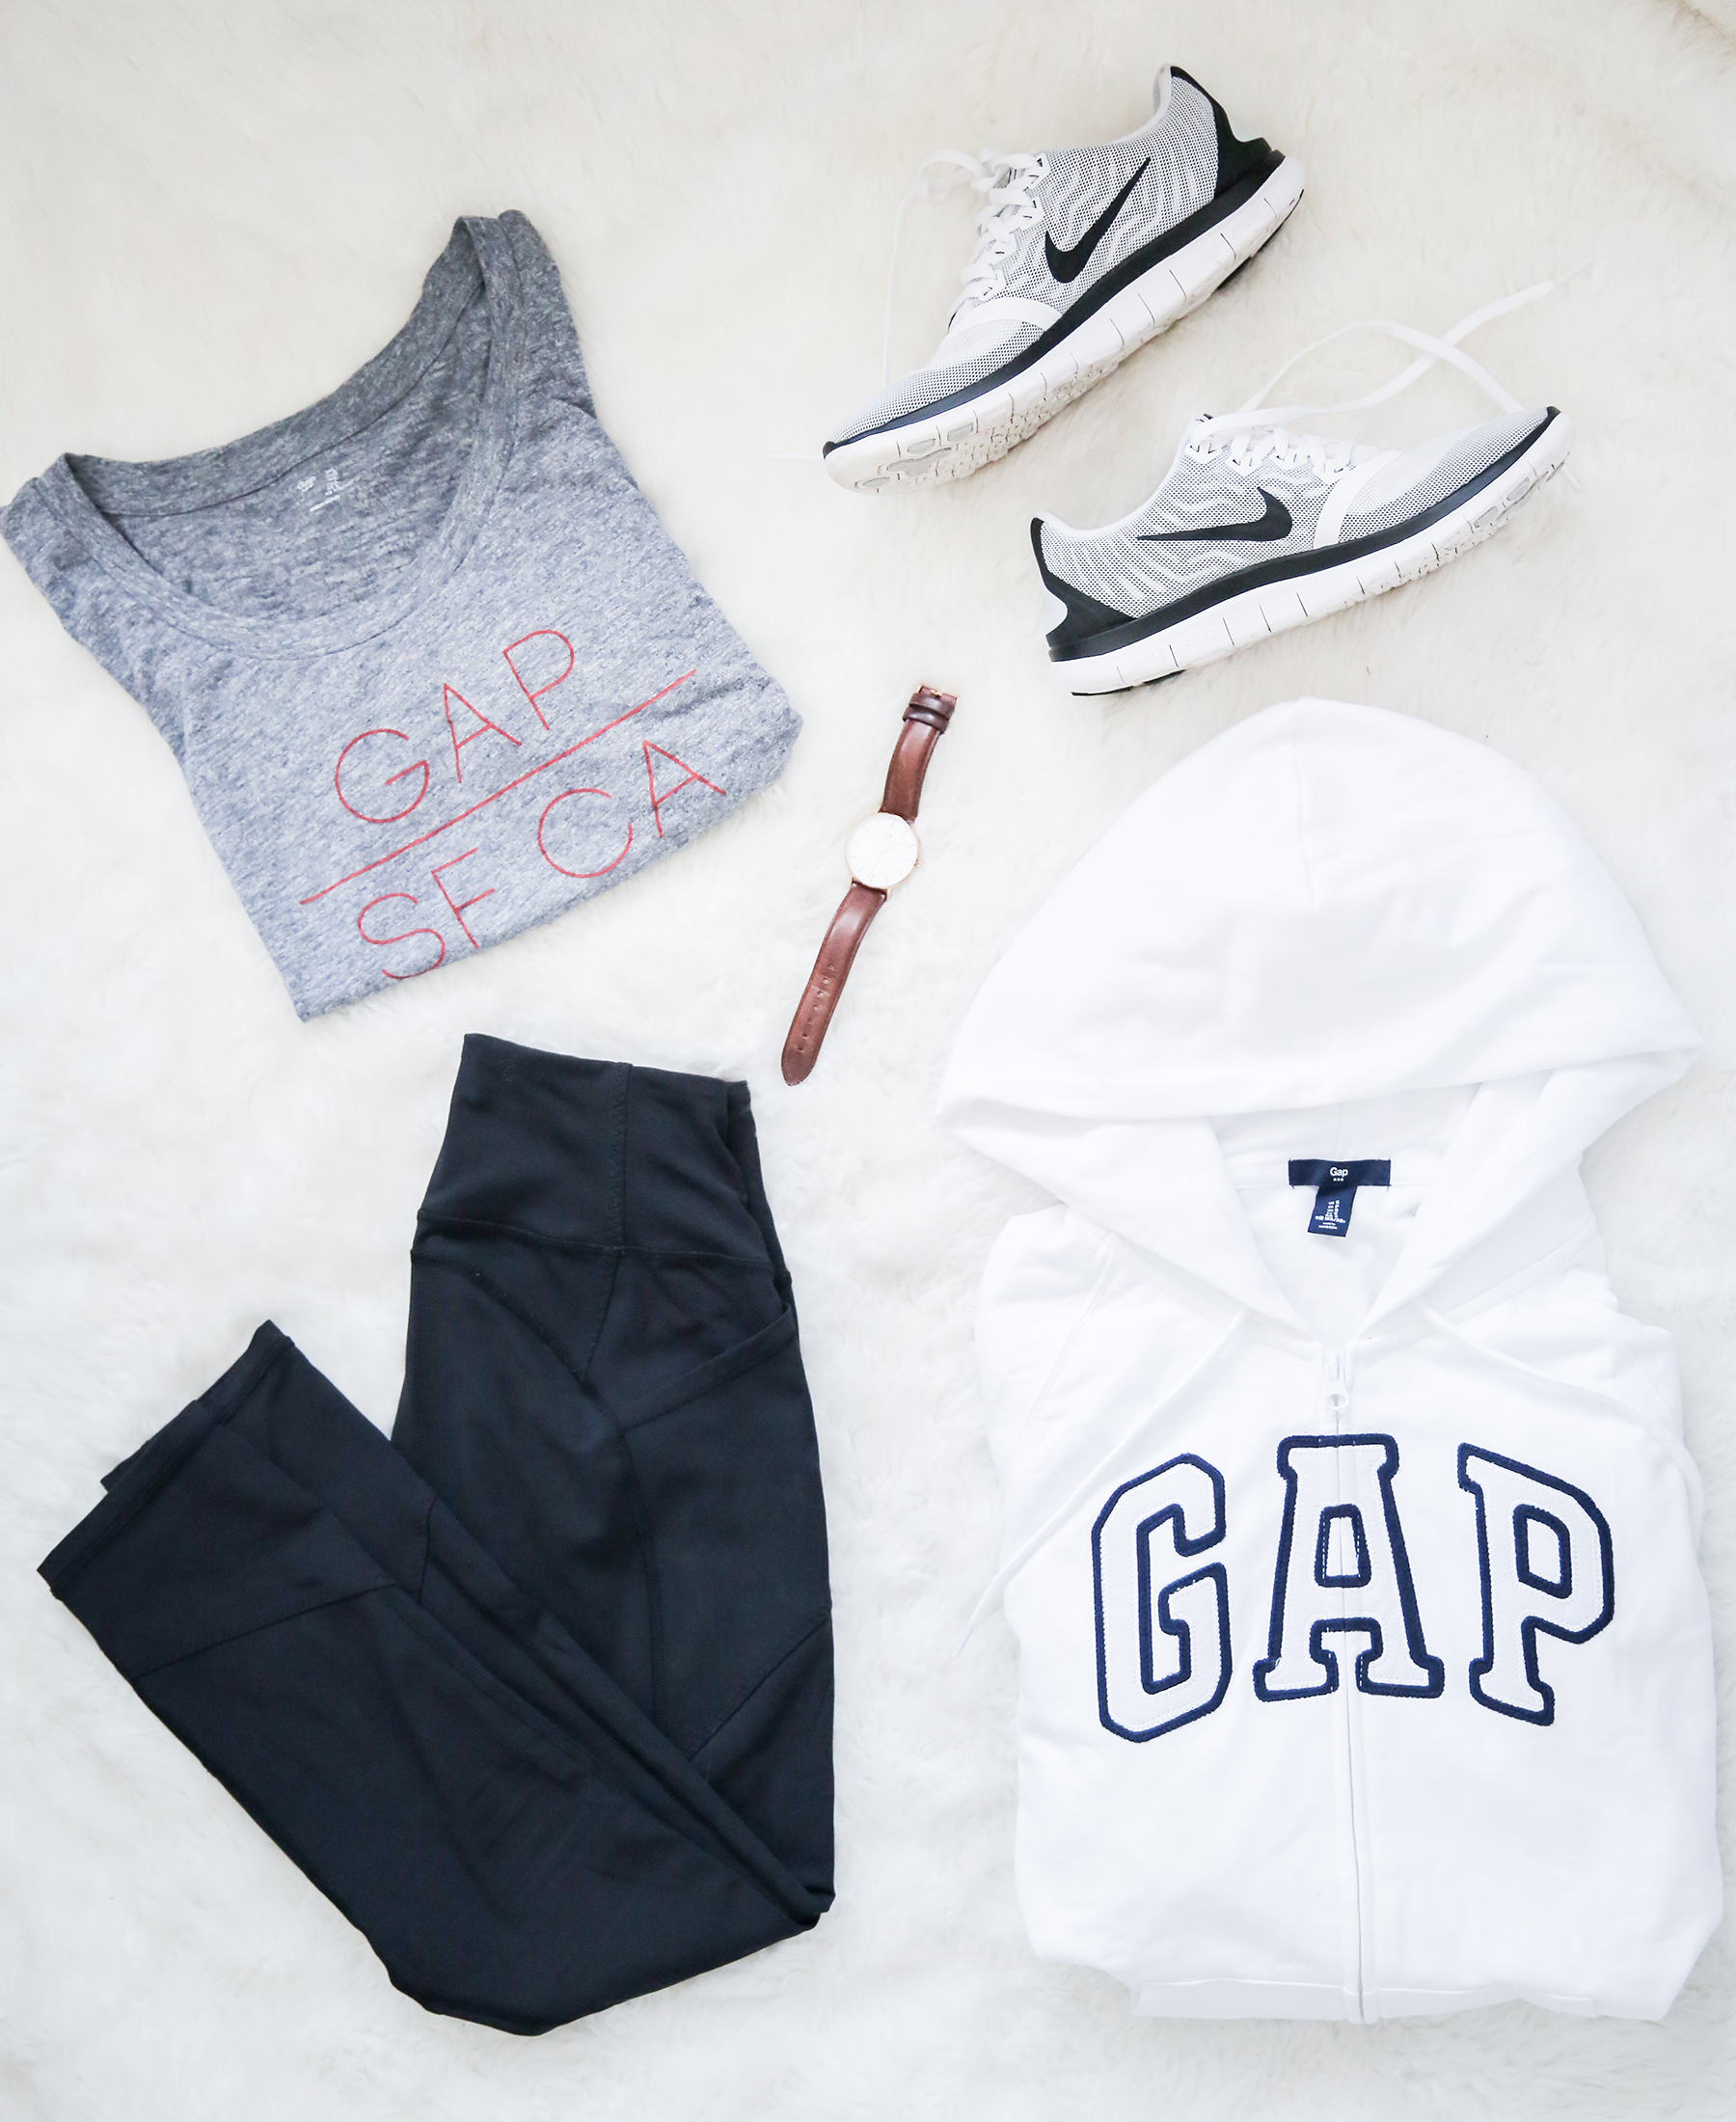 gap logo, gap factory, athleisure, stylish workout wear, stylish leisure wear, stylish lounge wear, cozy casual outfit, gray t-shirt, white zip-up, black leggings outfit, photography by Andrea Posadas of Amanda Holstein for Advicefroma20Something.com